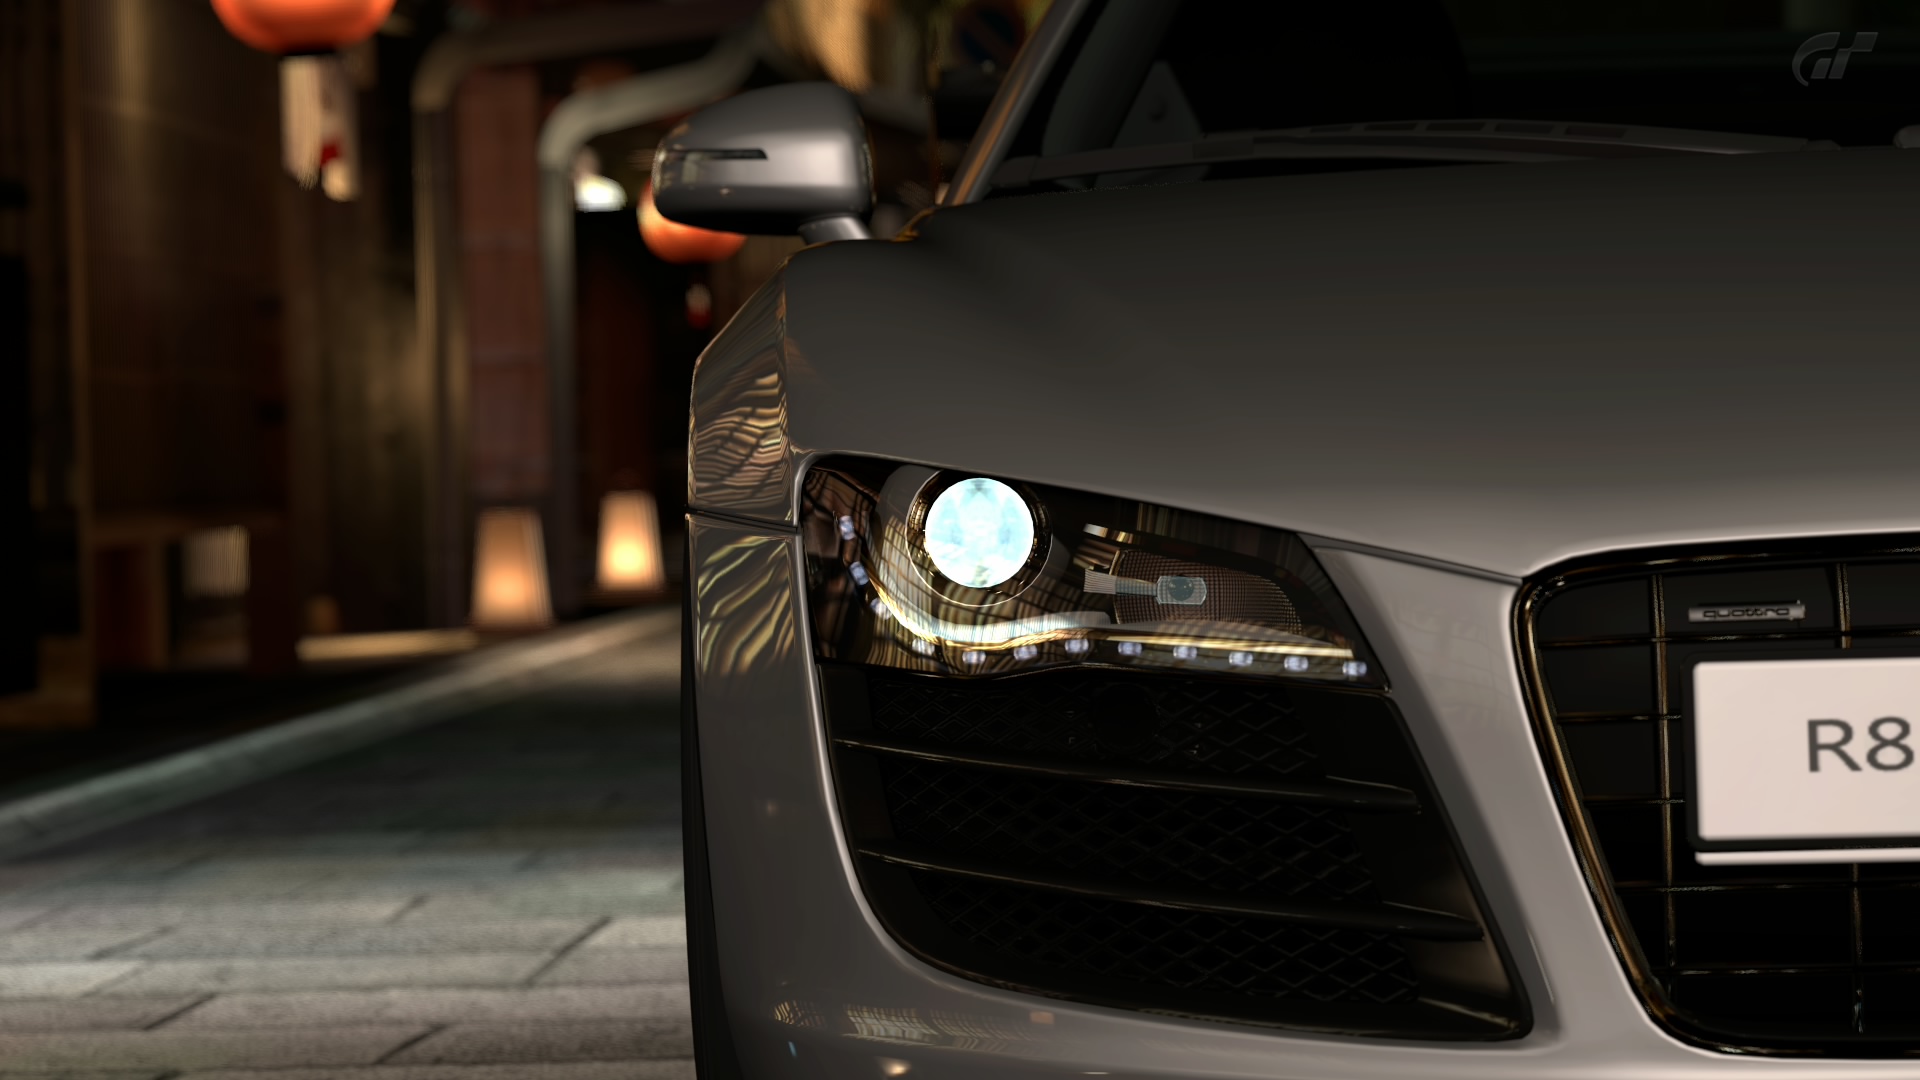 43 Audi Wallpapers Backgrounds In Hd For Free Download